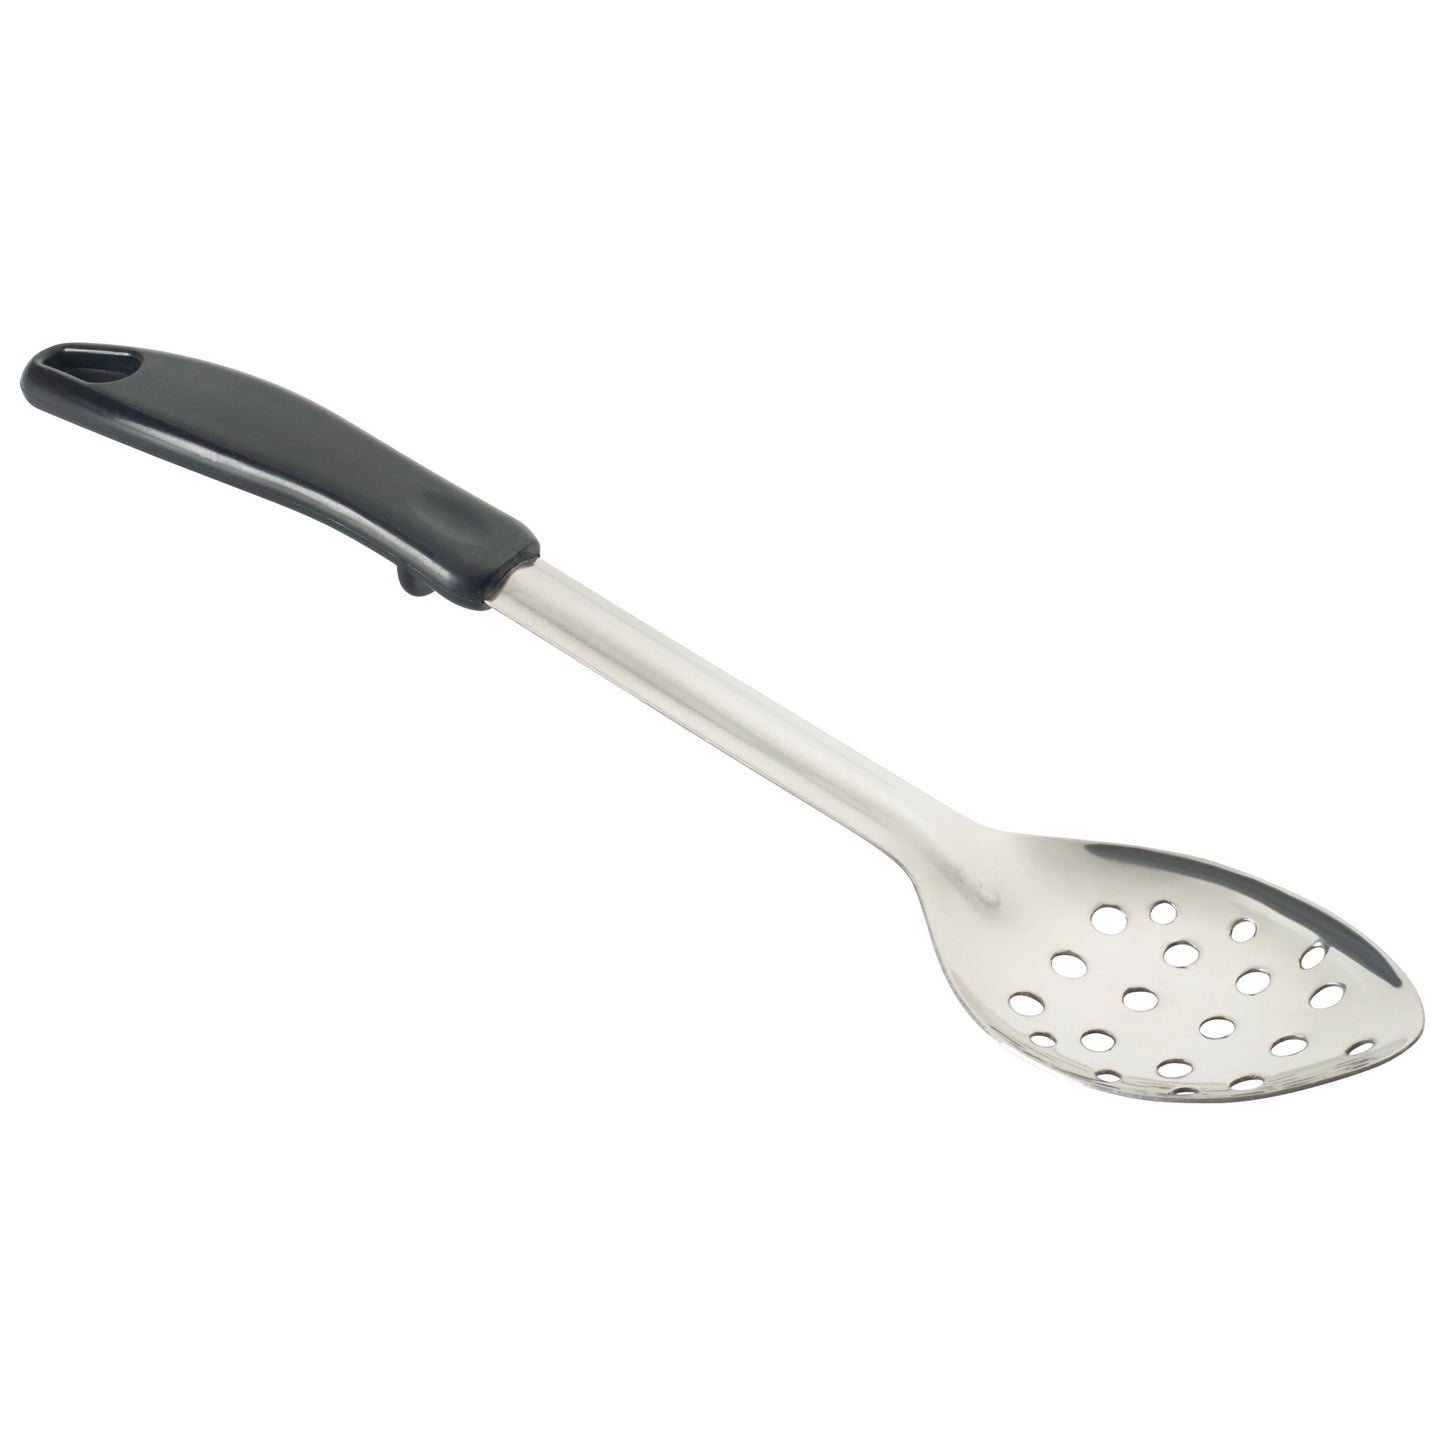 BHPP-13 - Basting Spoon with Stop-Hook Polypropylene Handle - Perforated, 13"